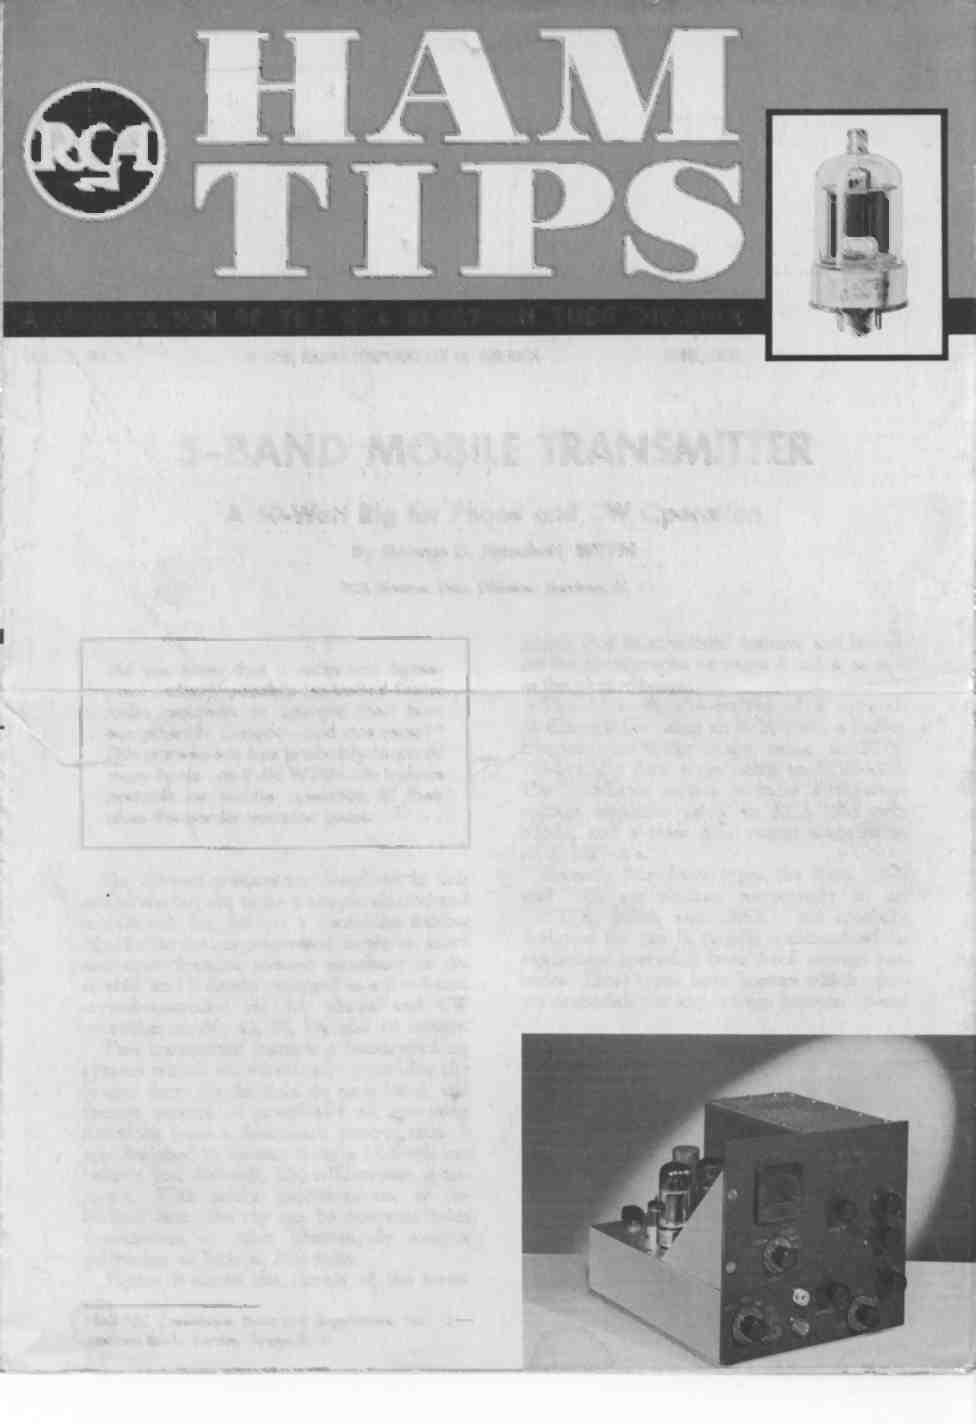 . 0 A PUBLIATION OF THE RA ELETRON TUBE DIVISION VOL. 19, NO. 2 1959, RADIO ORPORATION OF AMERIA JUNE, 1959 5 -BAND MOBILE TRANSMITTER A 50 -Watt Rig for Phone and W Operation By George D.